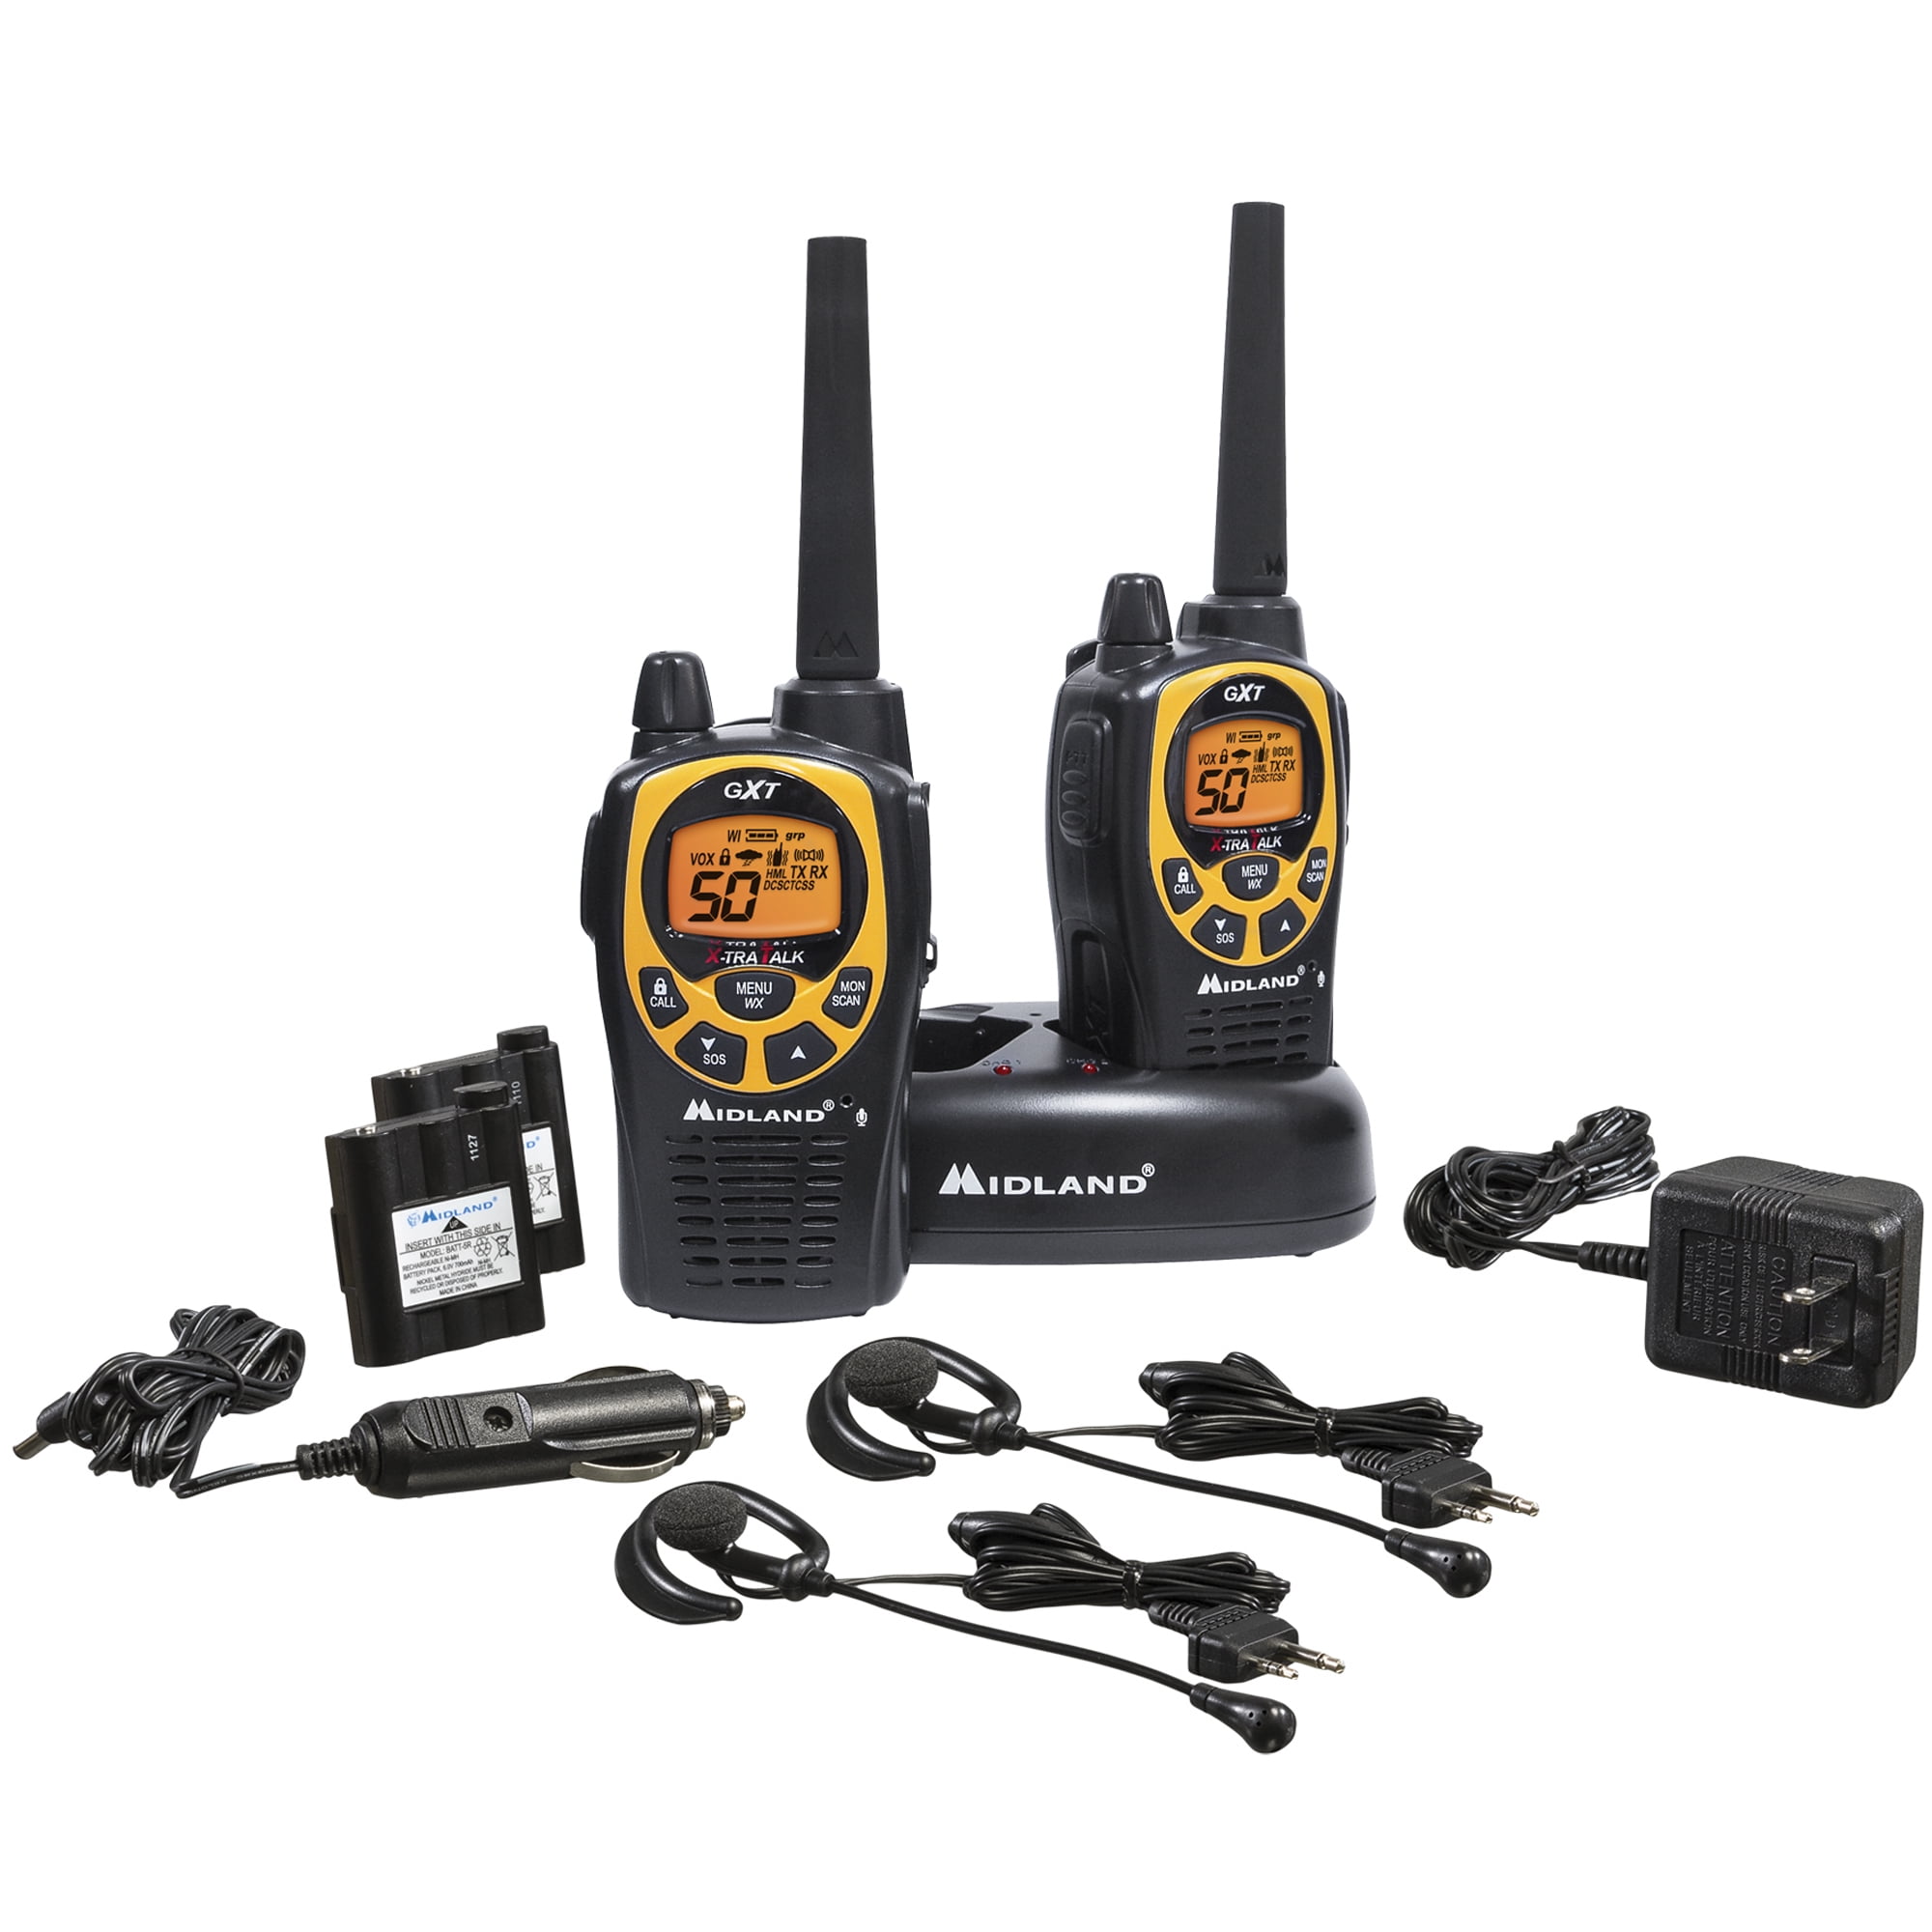 Midland Consumer Radio gxt1030vp4 36-Mile 50-Channel GMRS Two-Way Radio Black/Yellow)